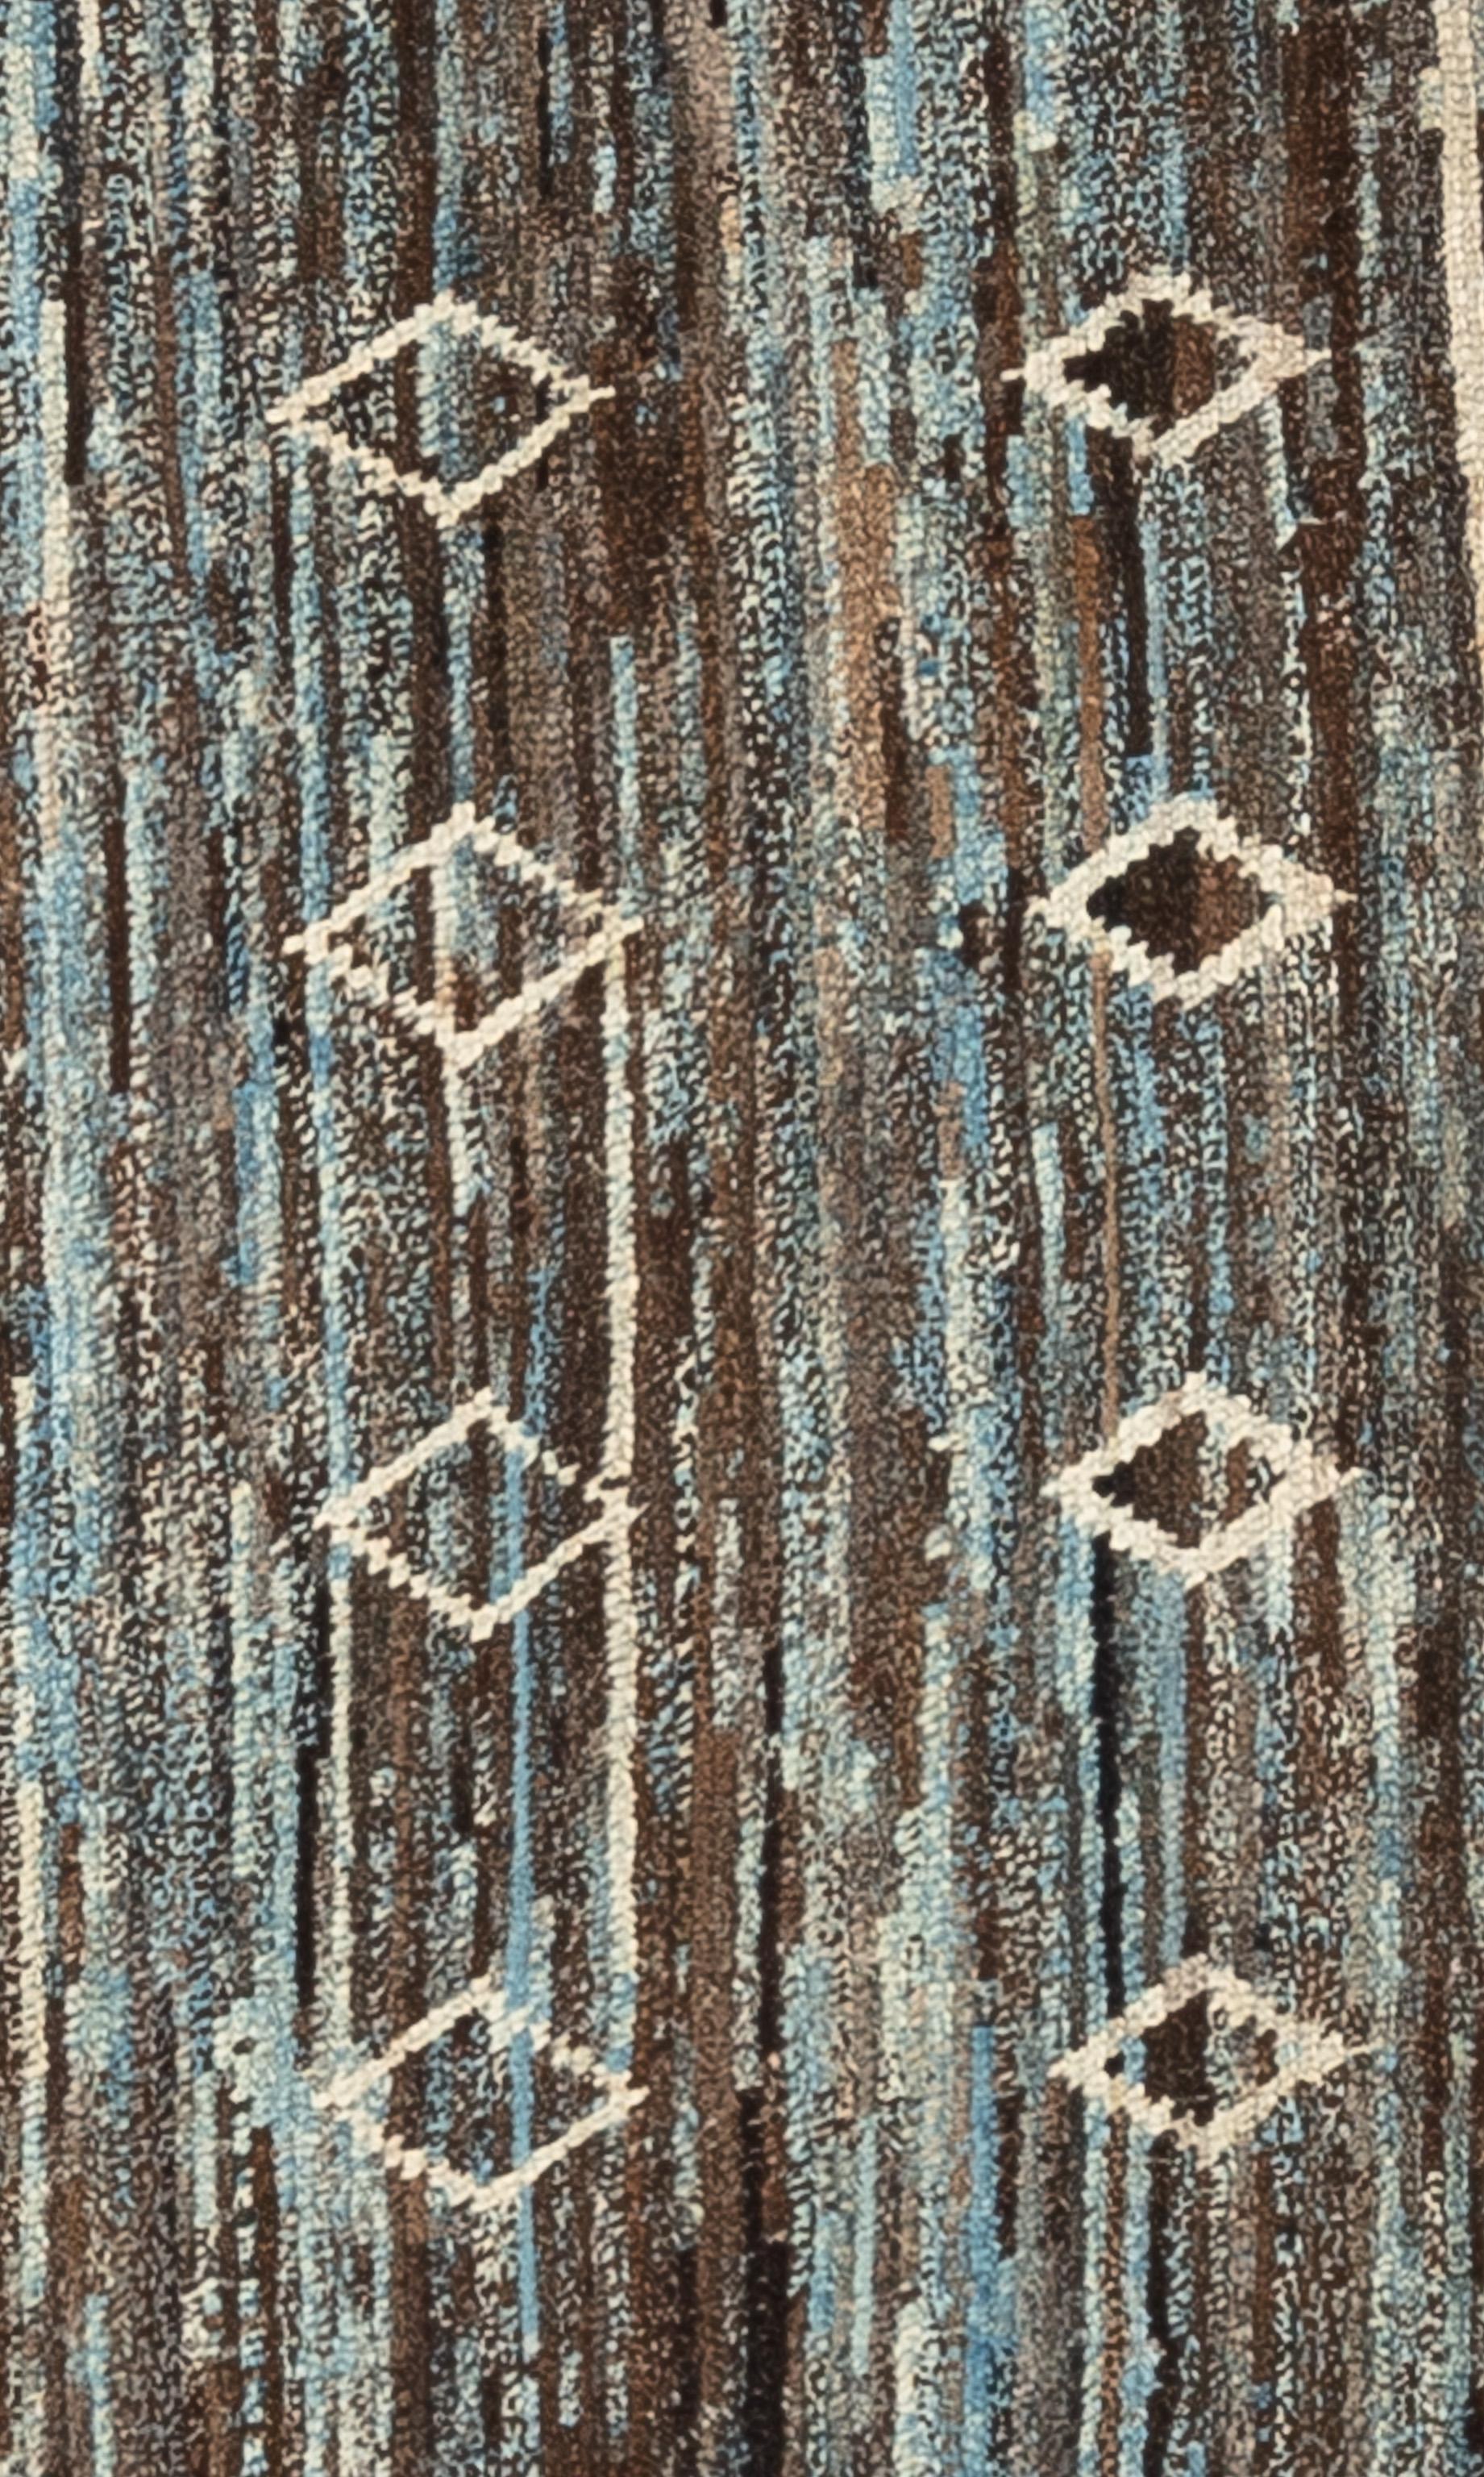 Handwoven with 100% handspun wool, in the mountains of Afghanistan; this beautiful naturally dyed Moroccan rug is truly one-of-a-kind. Moroccan rugs tend to be simple and are the perfect compliment for your décor. From minimalist modern to